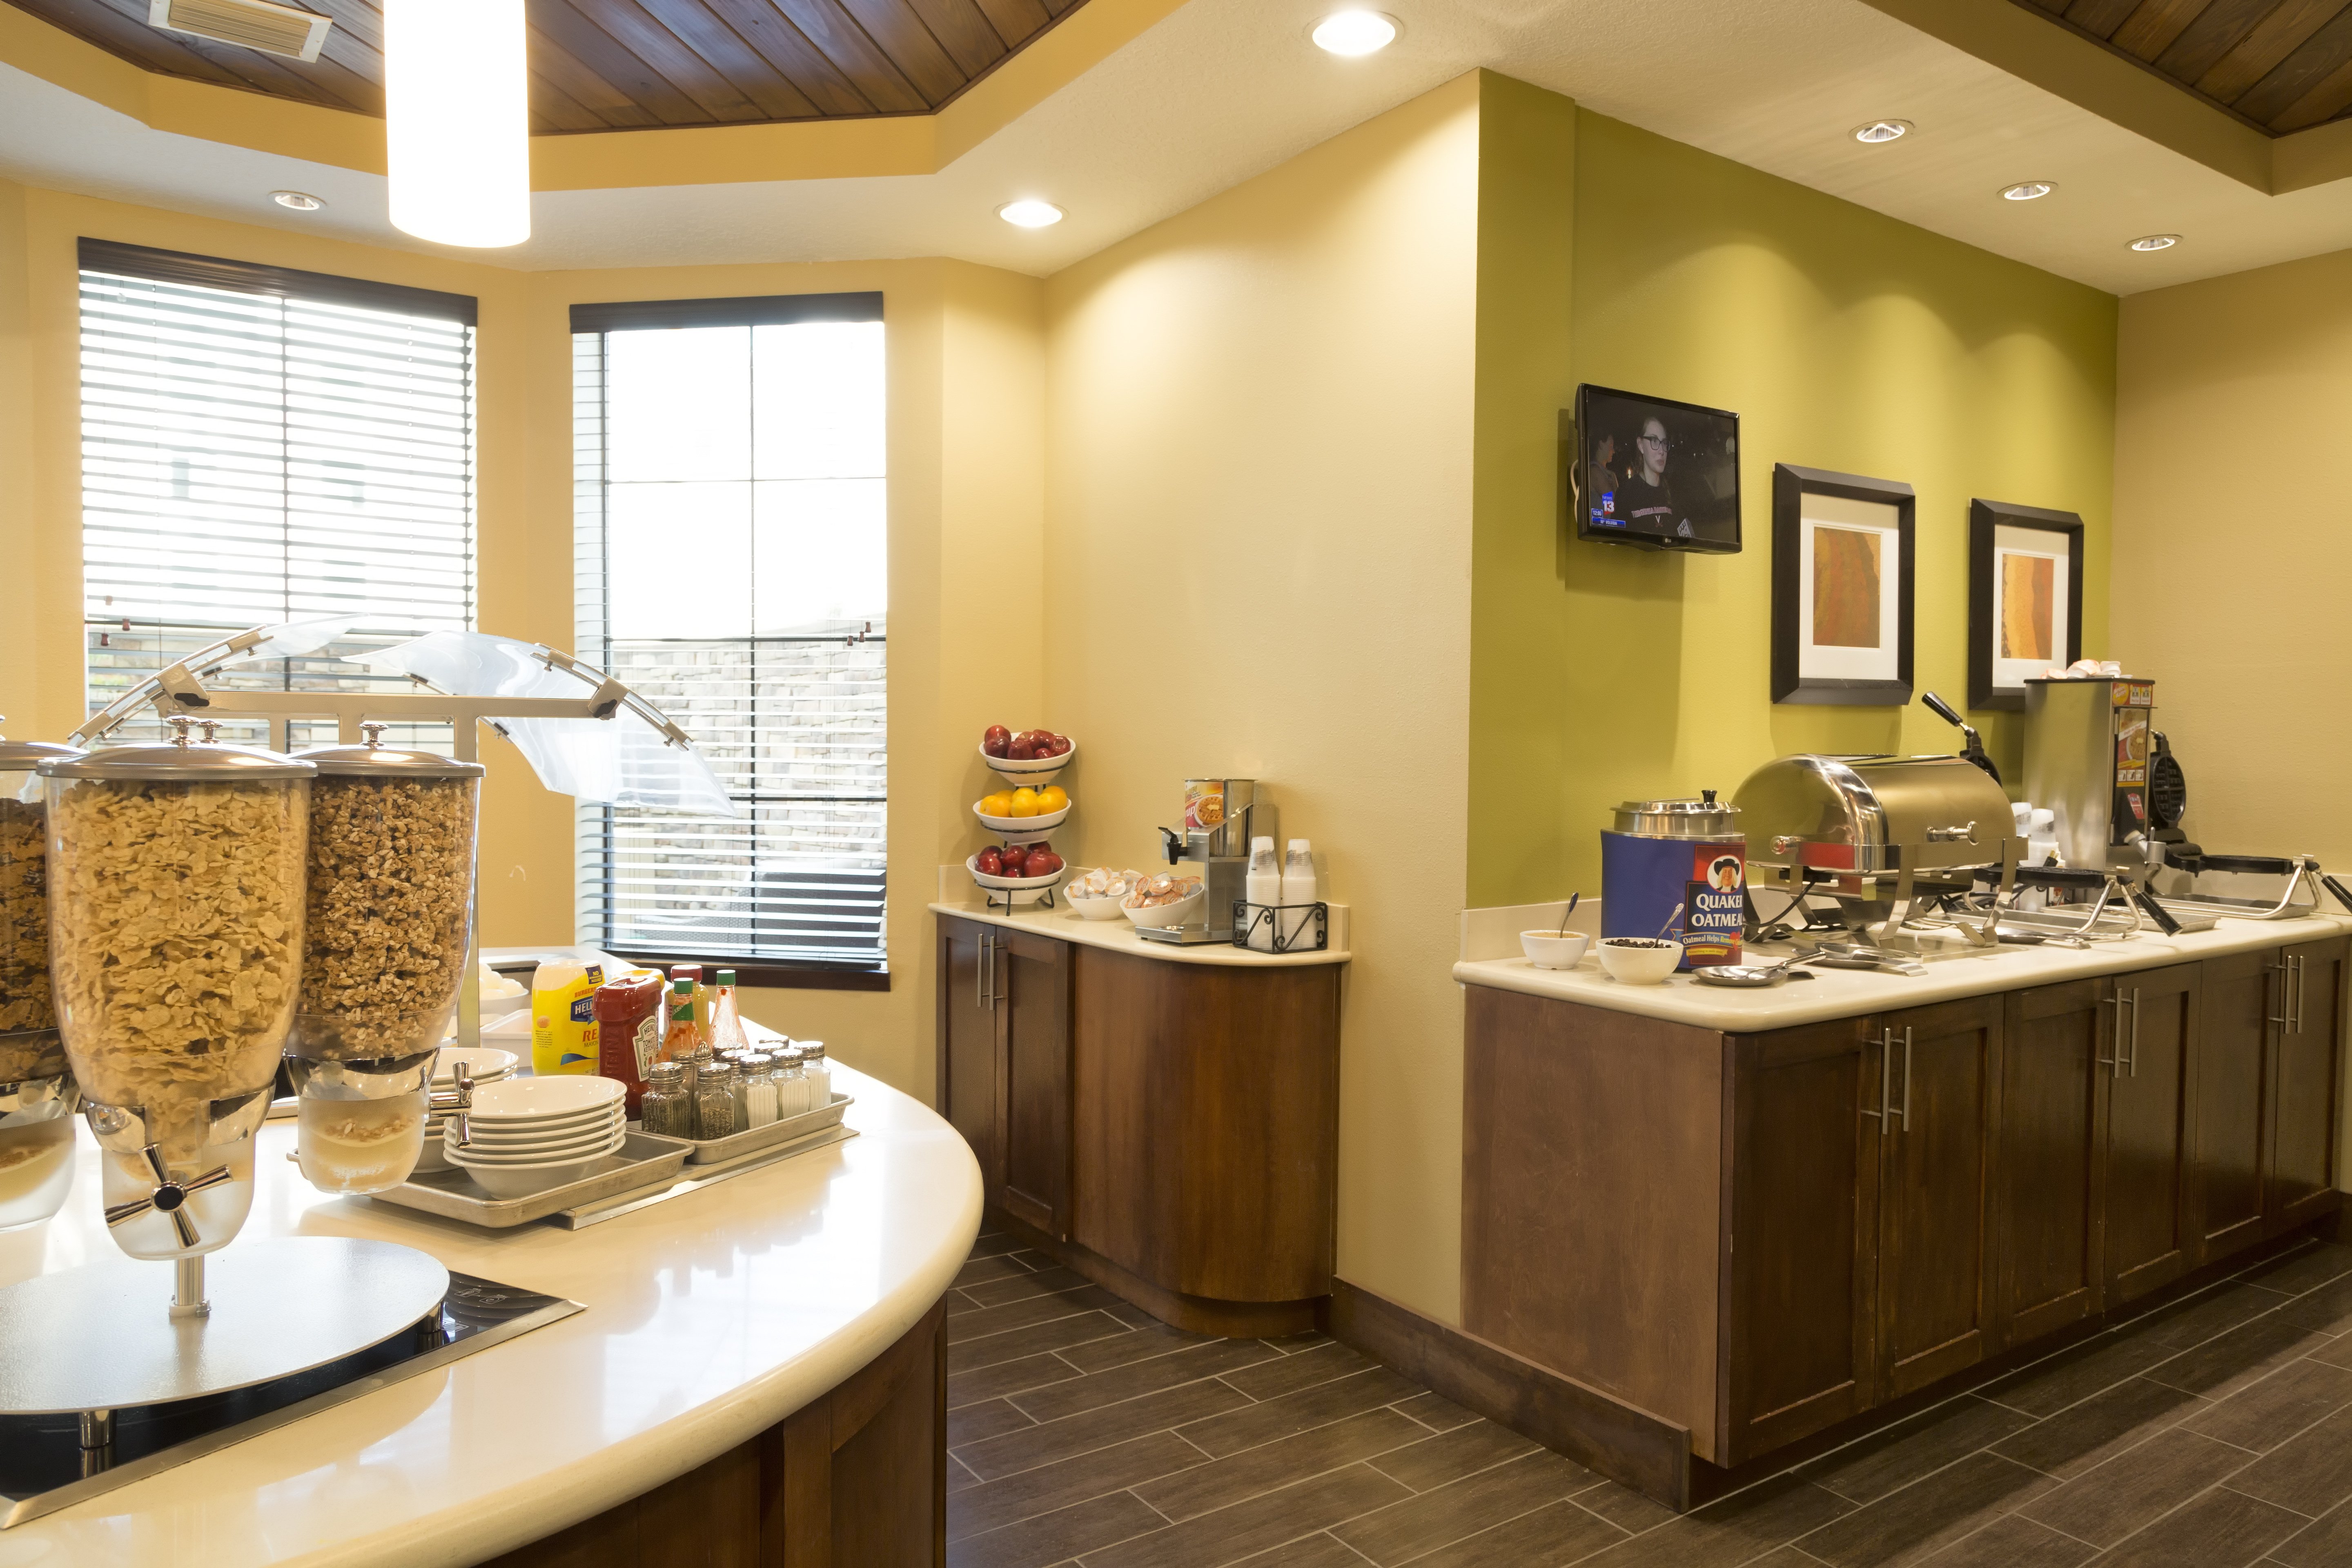 Complimentary breakfast buffet is available daily here.